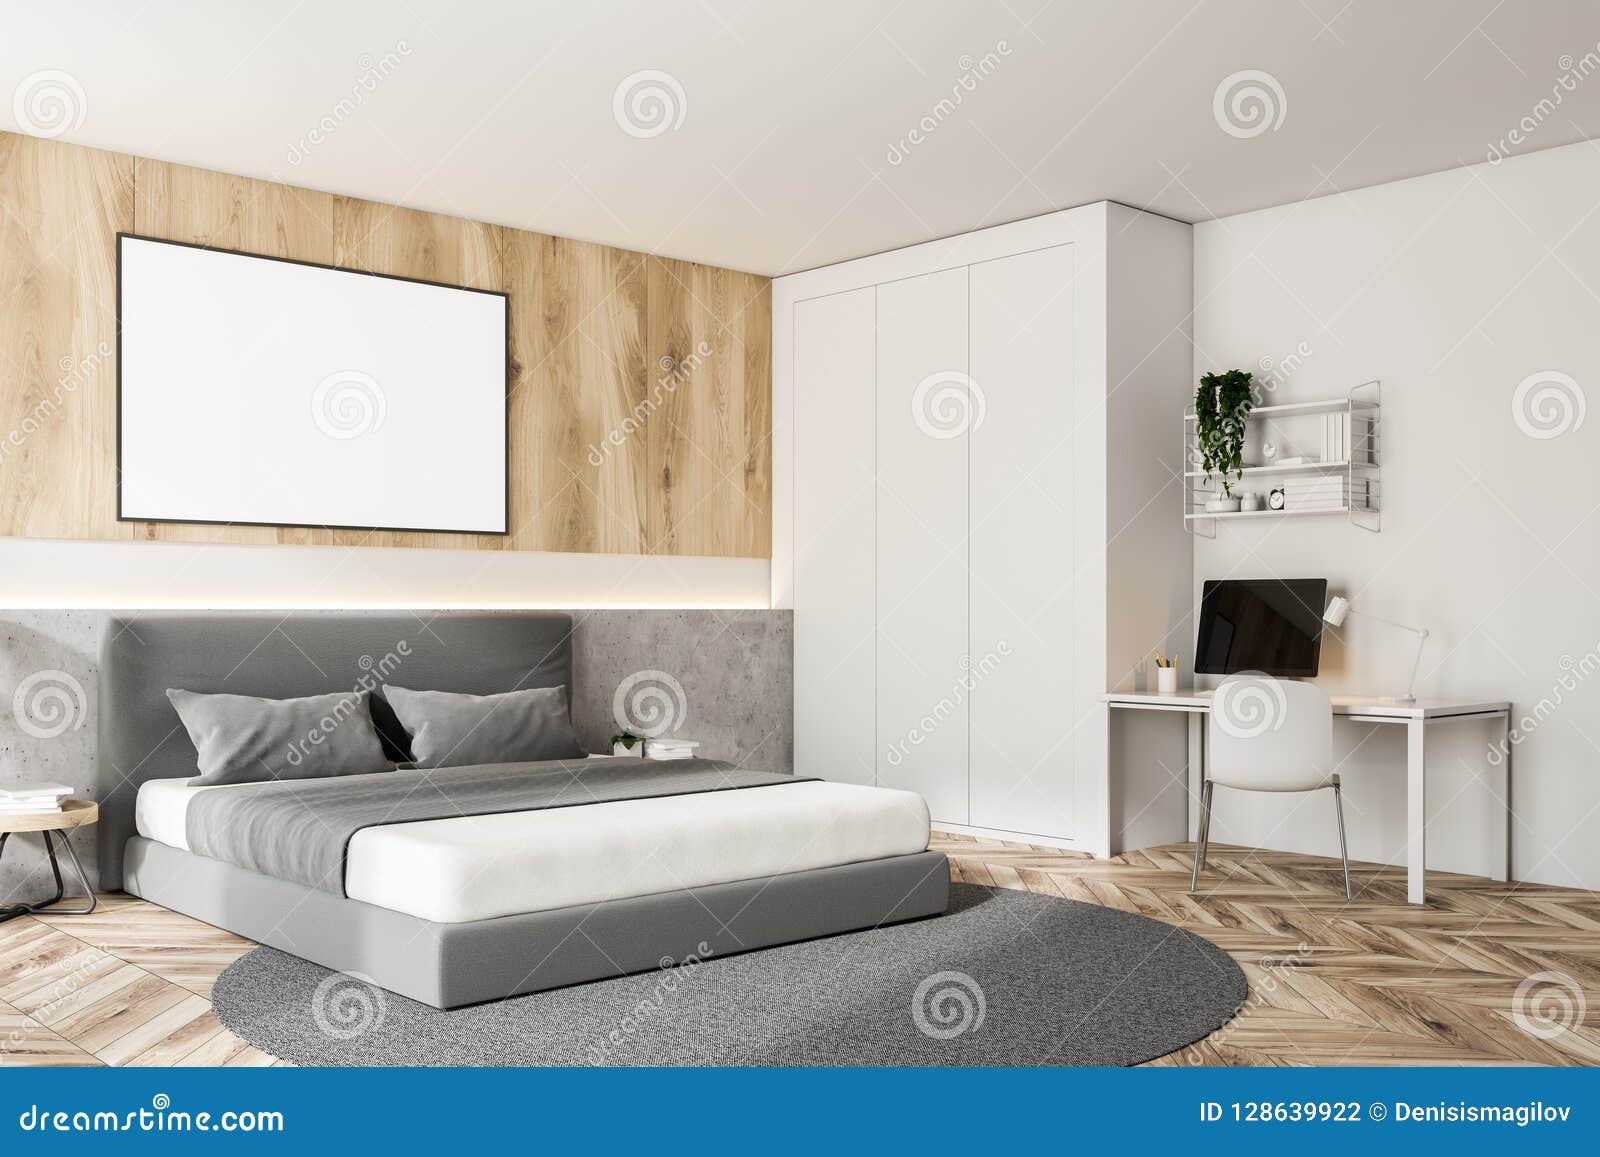 Wooden And White Bedroom With Home Office Stock Illustration